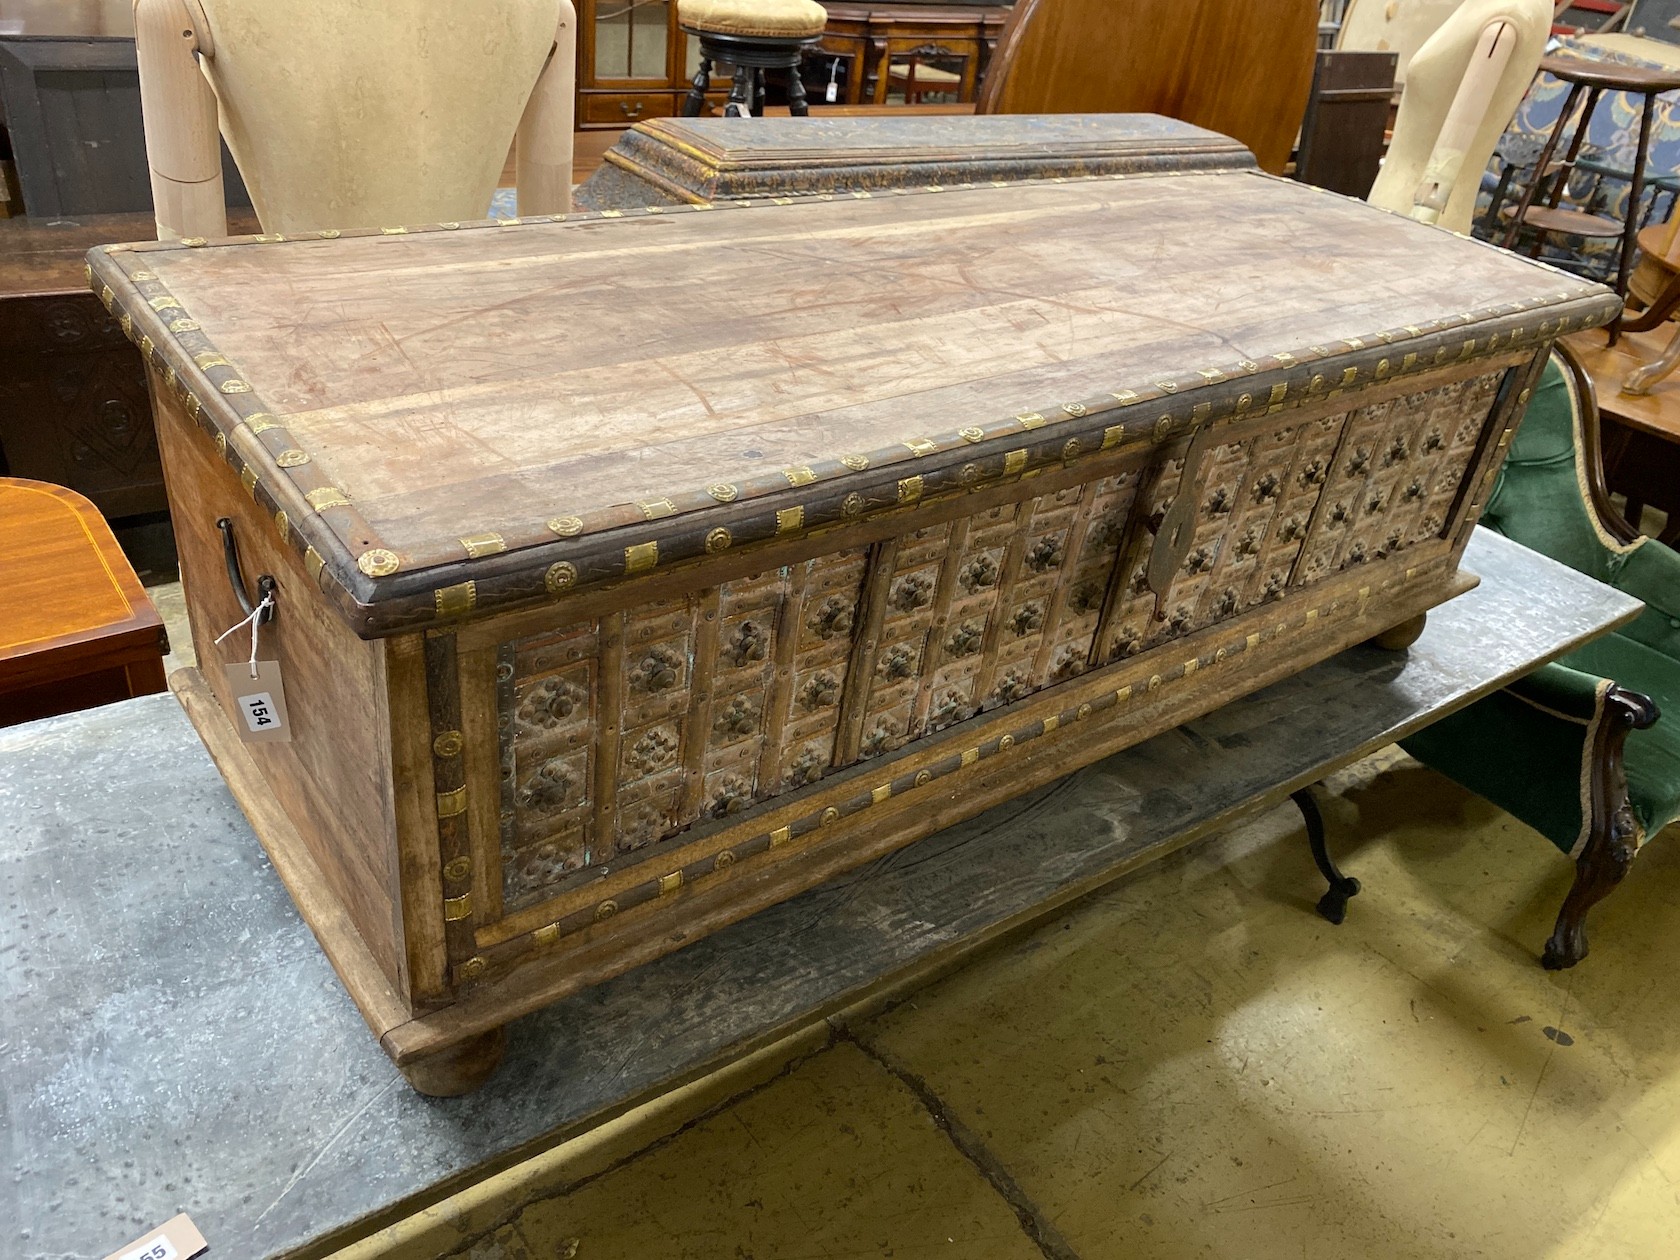 A South Asian brass mounted carved hardwood coffer, length 145cm, depth 55cm, height 50cm                                                                                                                                   